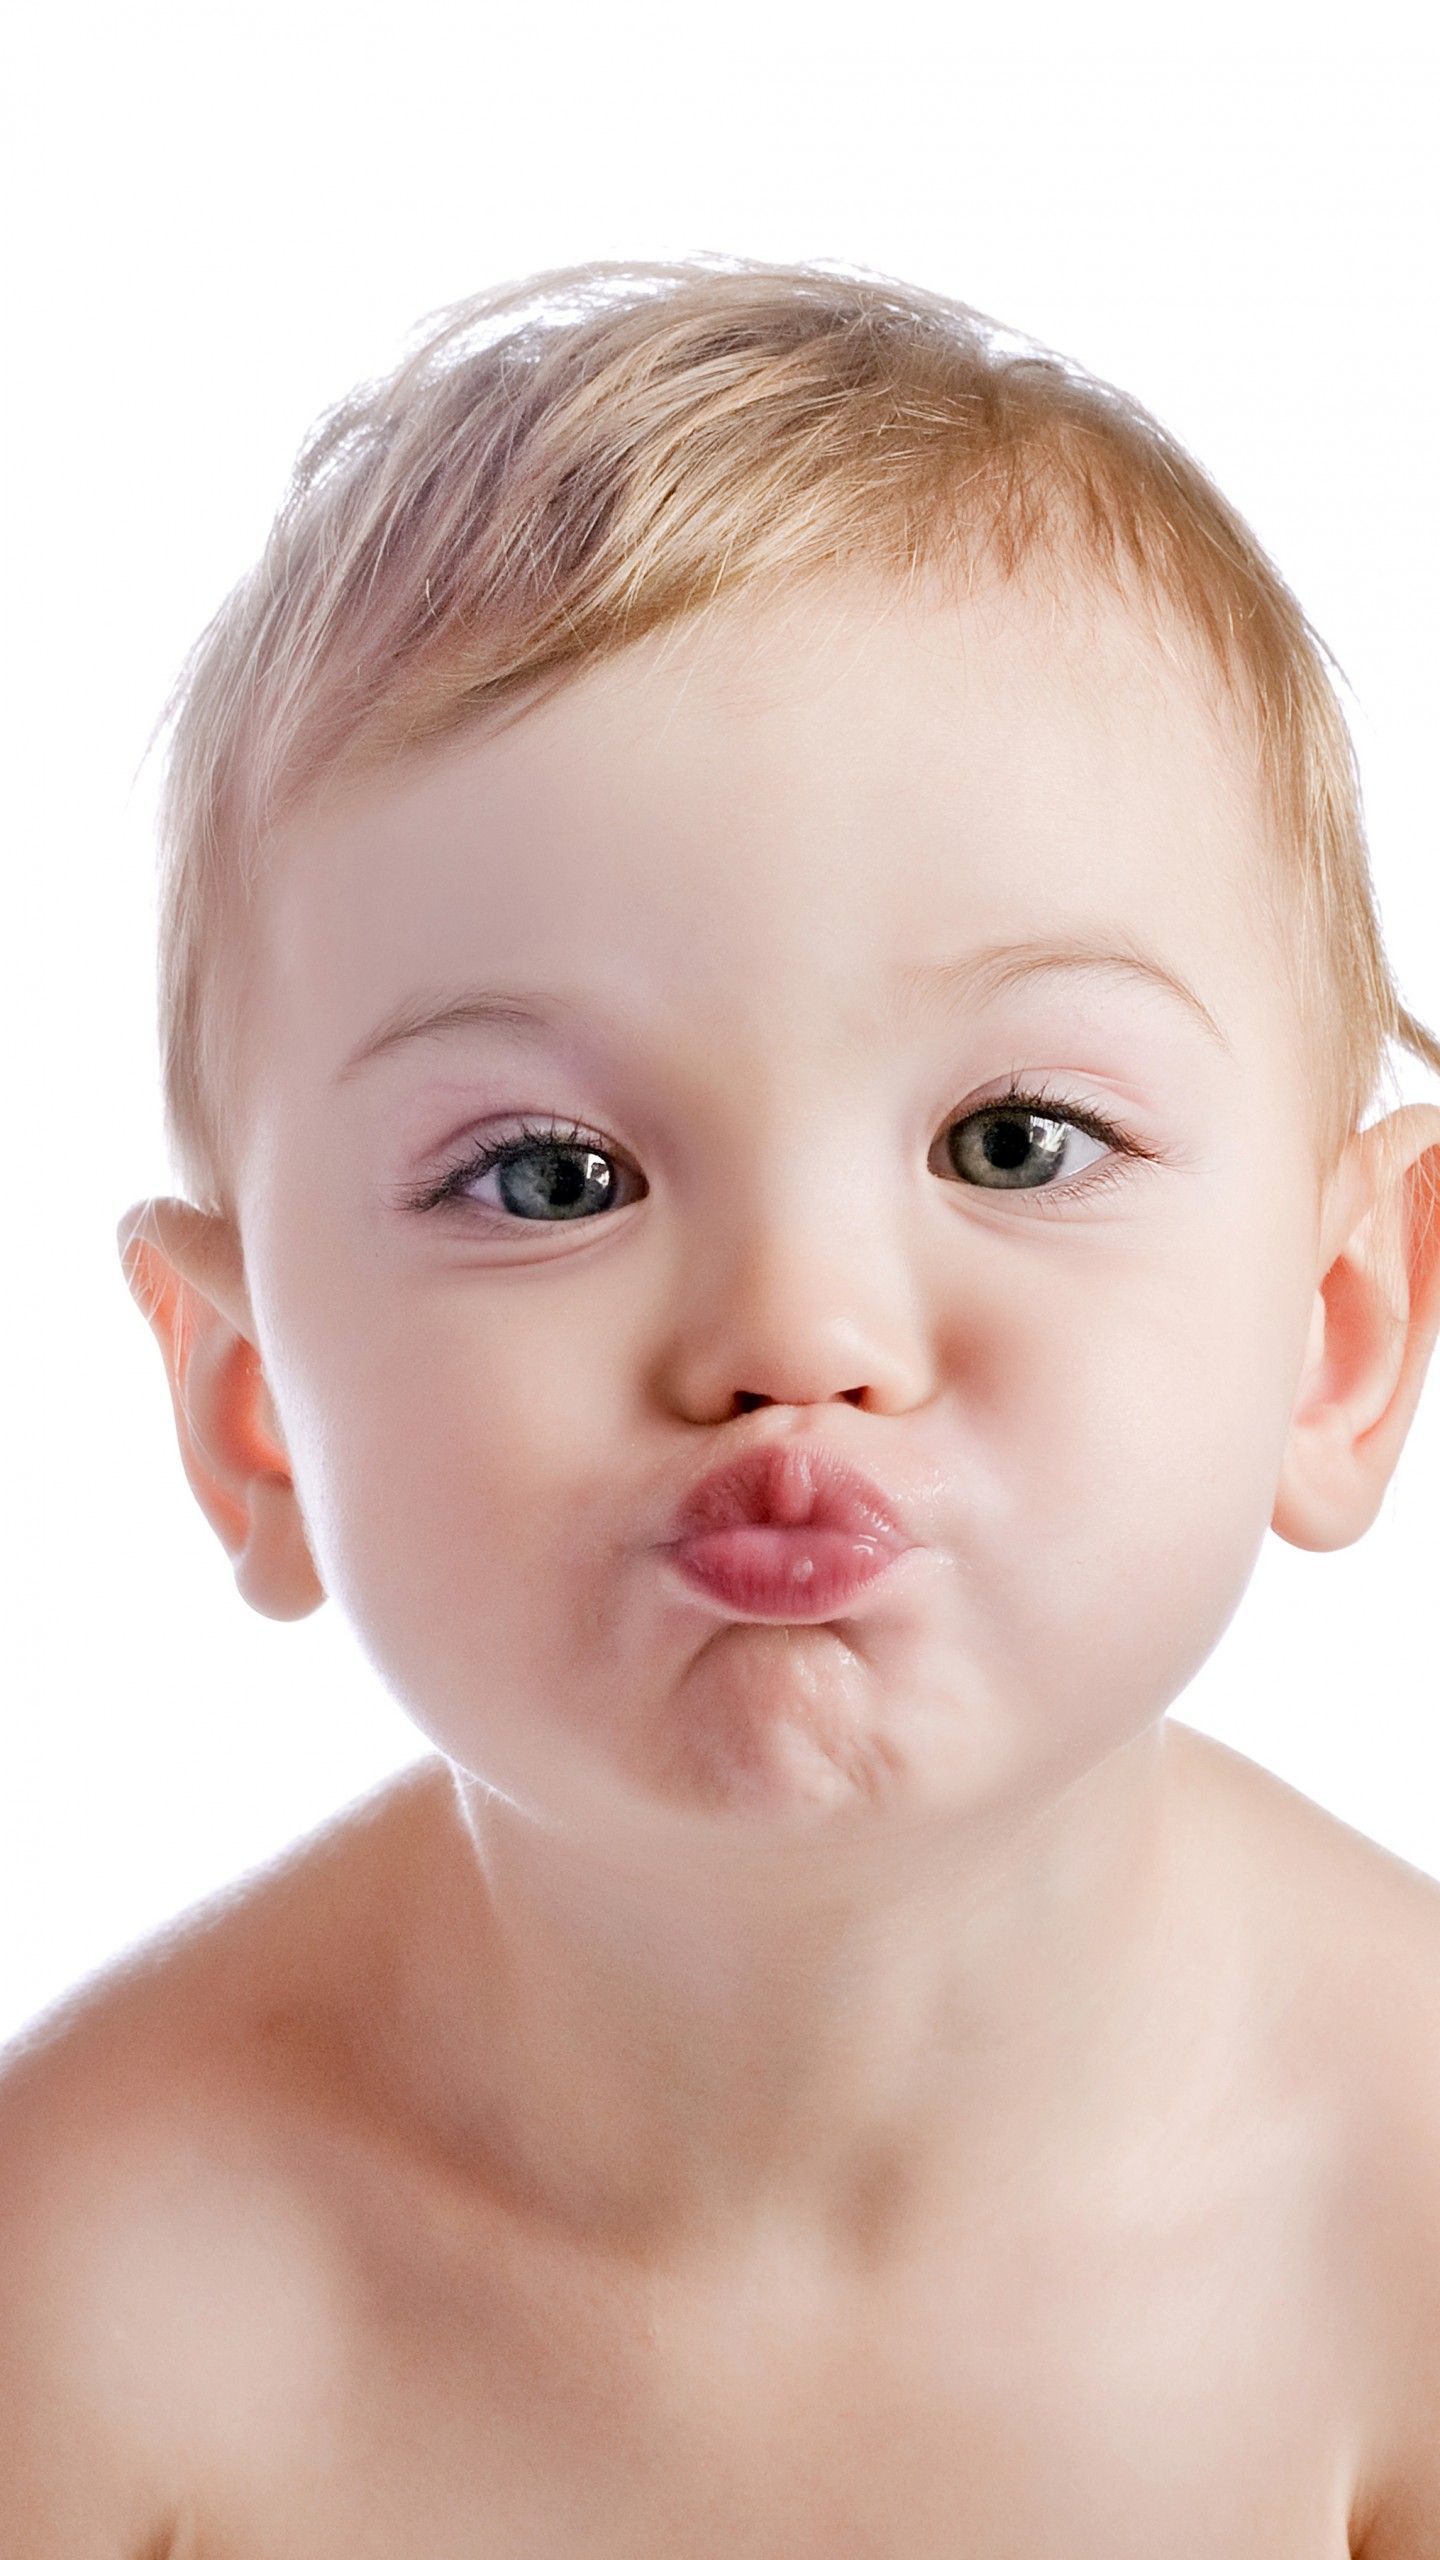 Wallpaper Kiss, Cute baby boy, Baby Kiss, 5K, Cute,. Wallpaper for iPhone, Android, Mobile and Desktop